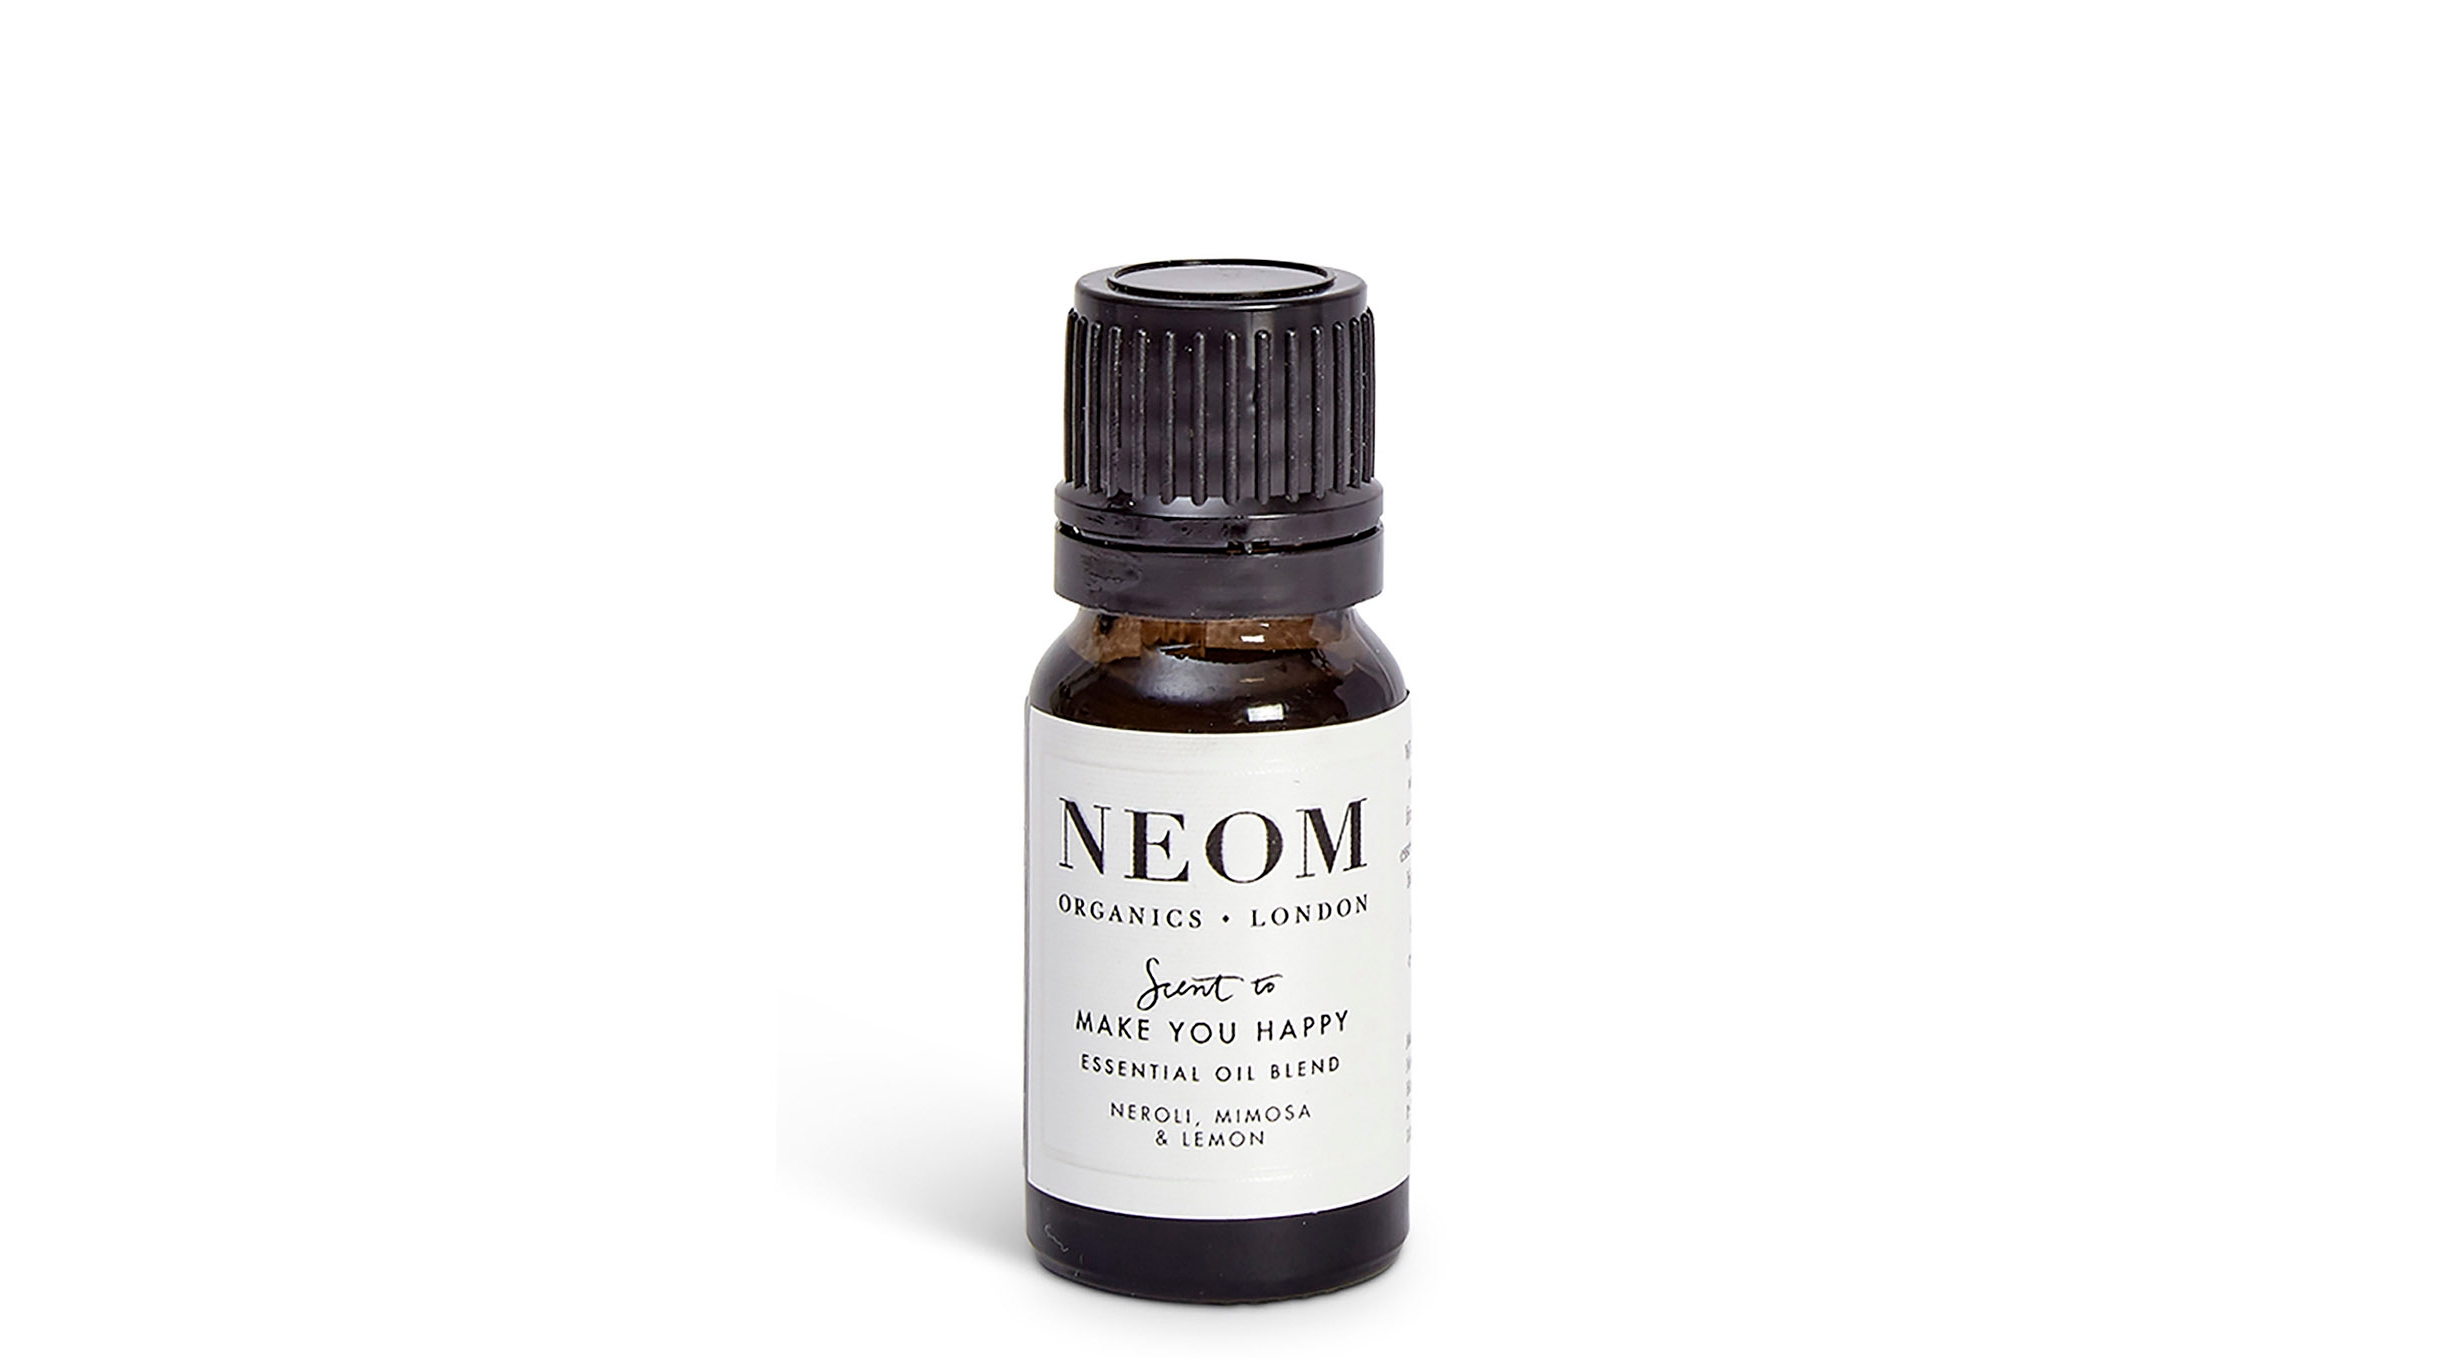 NEOM Scent to Make You Happy Essential Oil Blend 10ml - Harvey Nichols